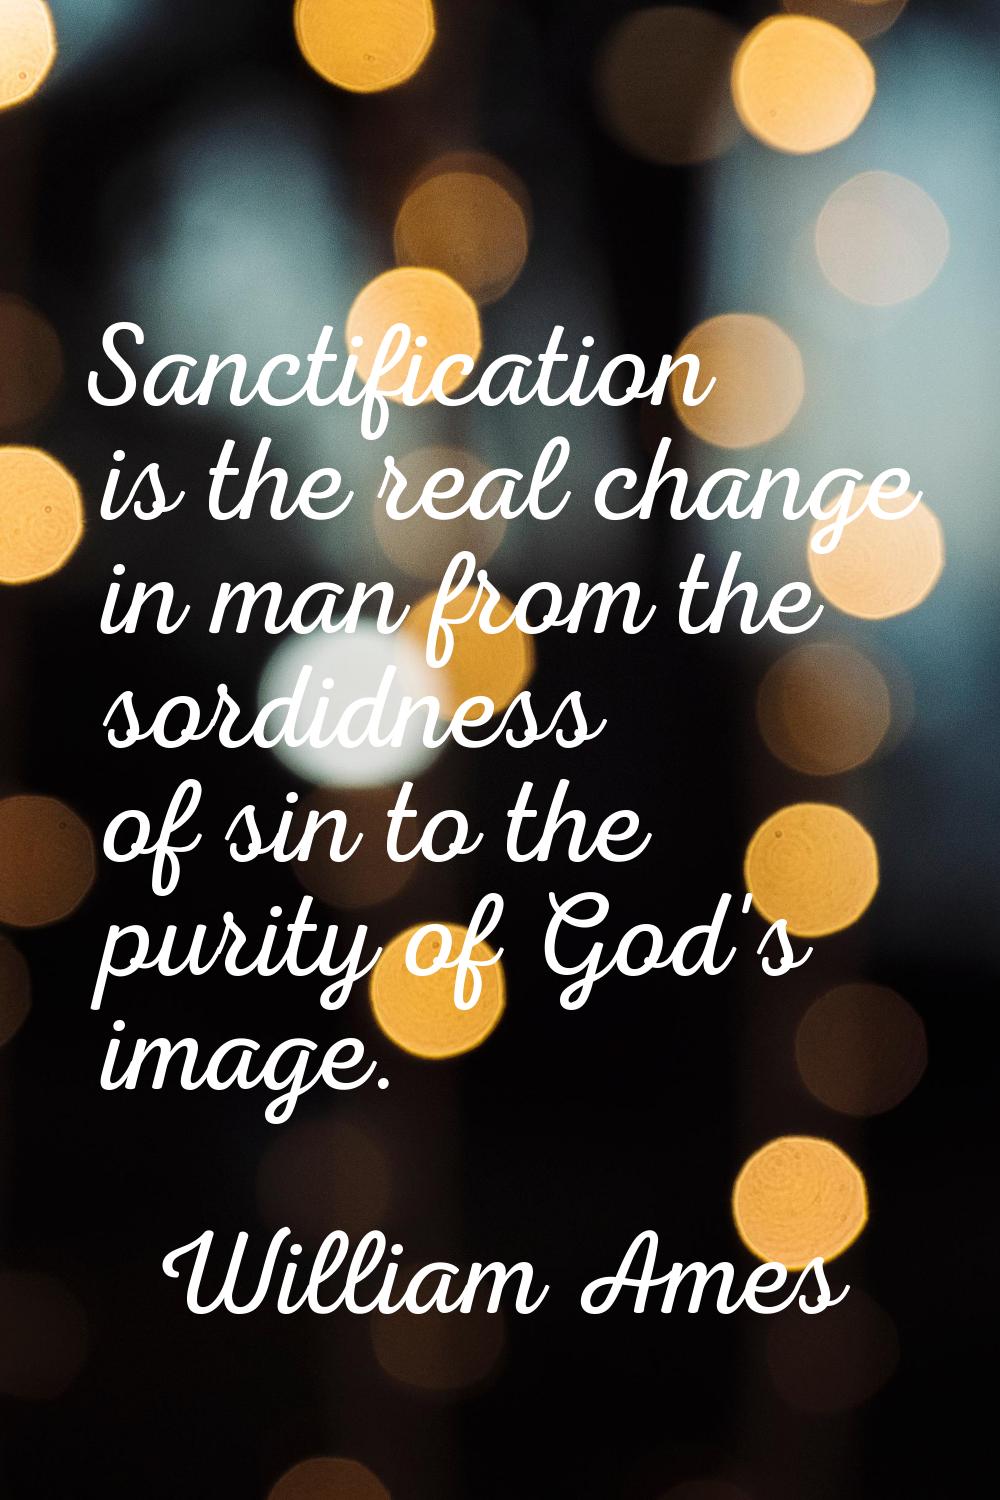 Sanctification is the real change in man from the sordidness of sin to the purity of God's image.